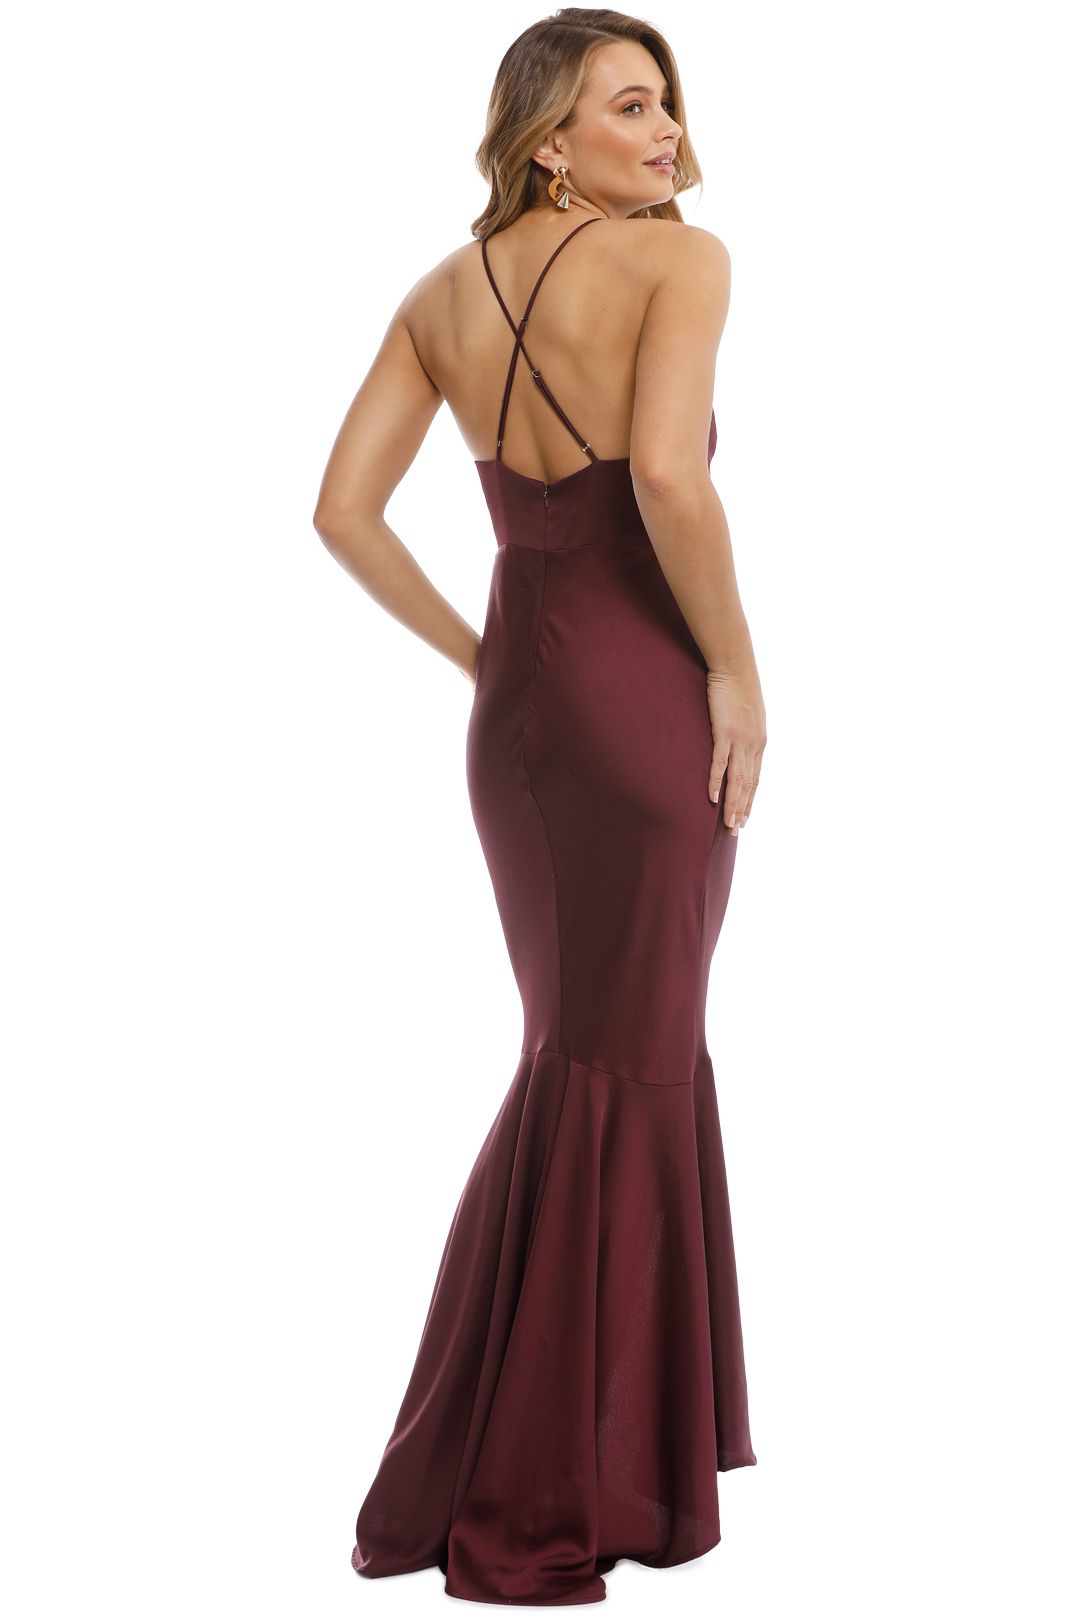 Grace and Hart - Juliets Delight Gown - Wine - Back